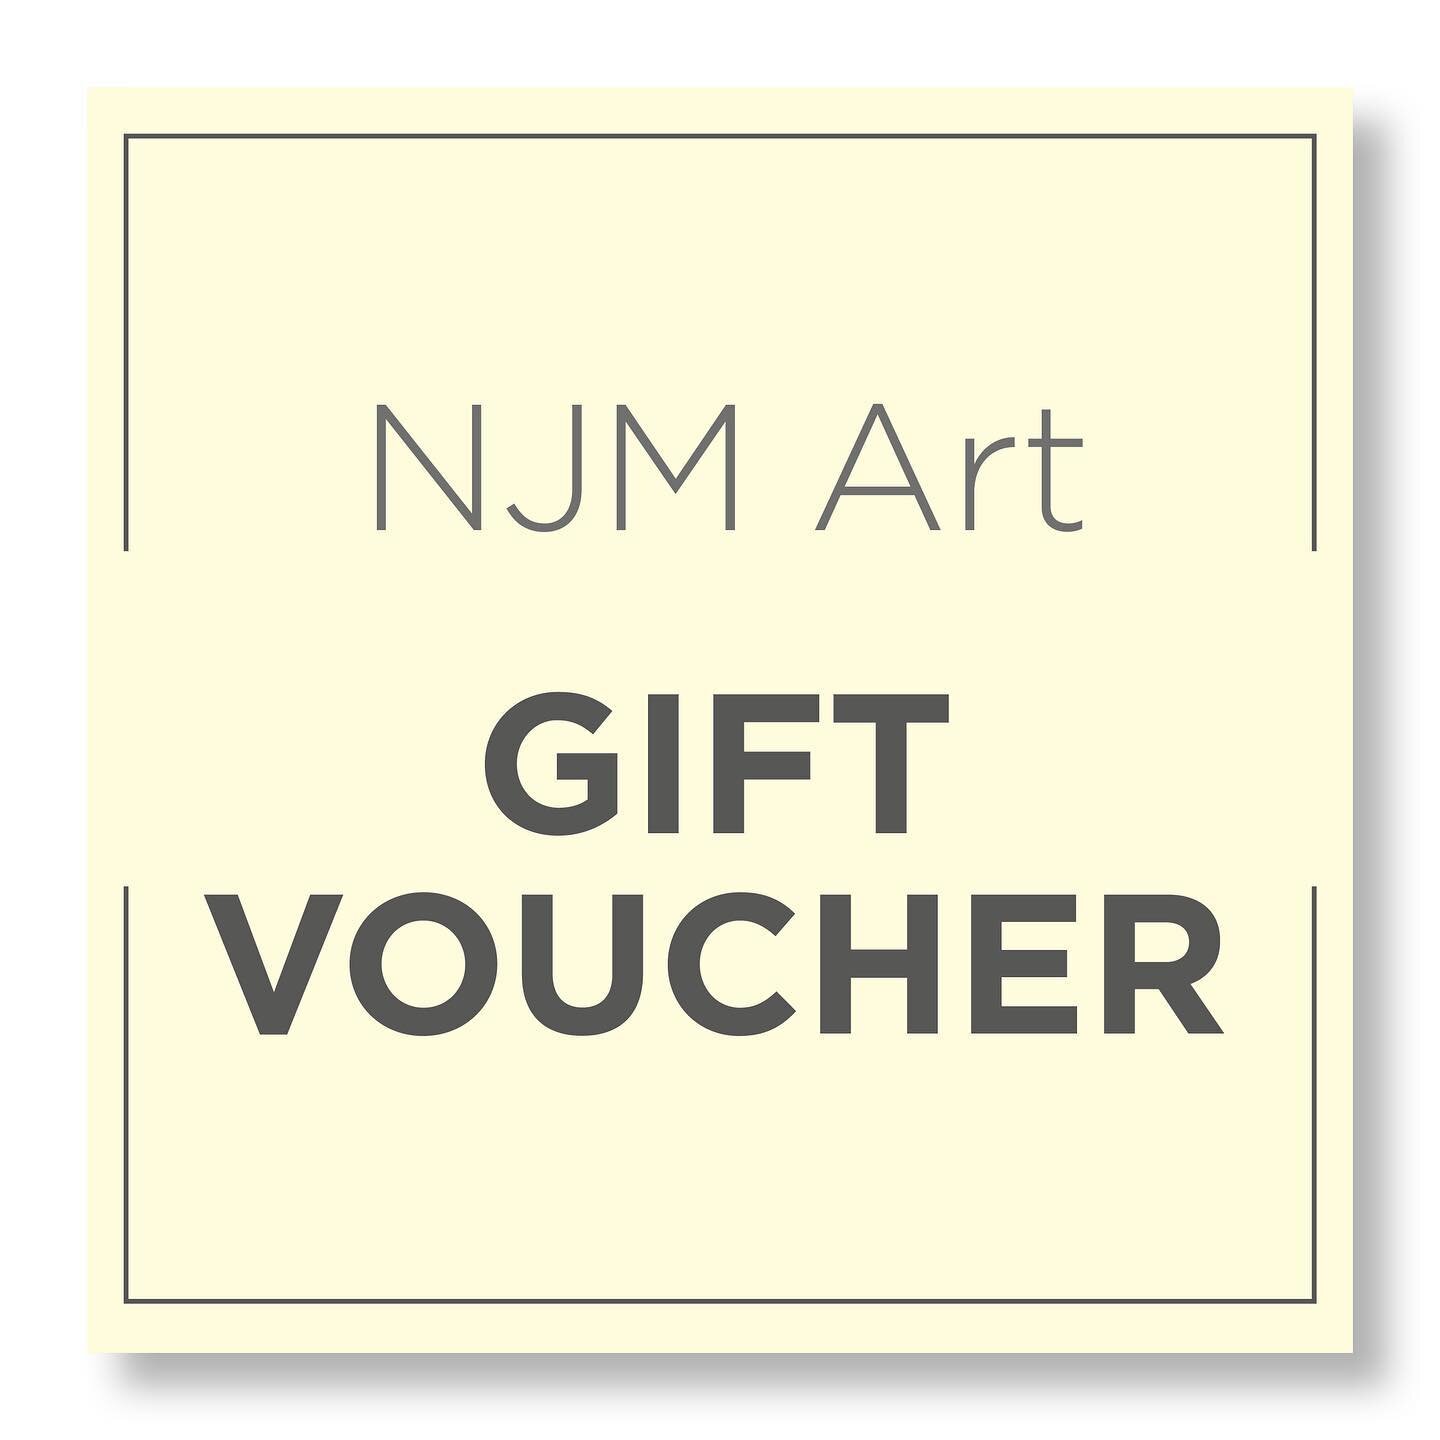 Gift vouchers for pet portraits now available to purchase online, for more information please visit my website . Www.swinhopemilldogboarding.co.uk